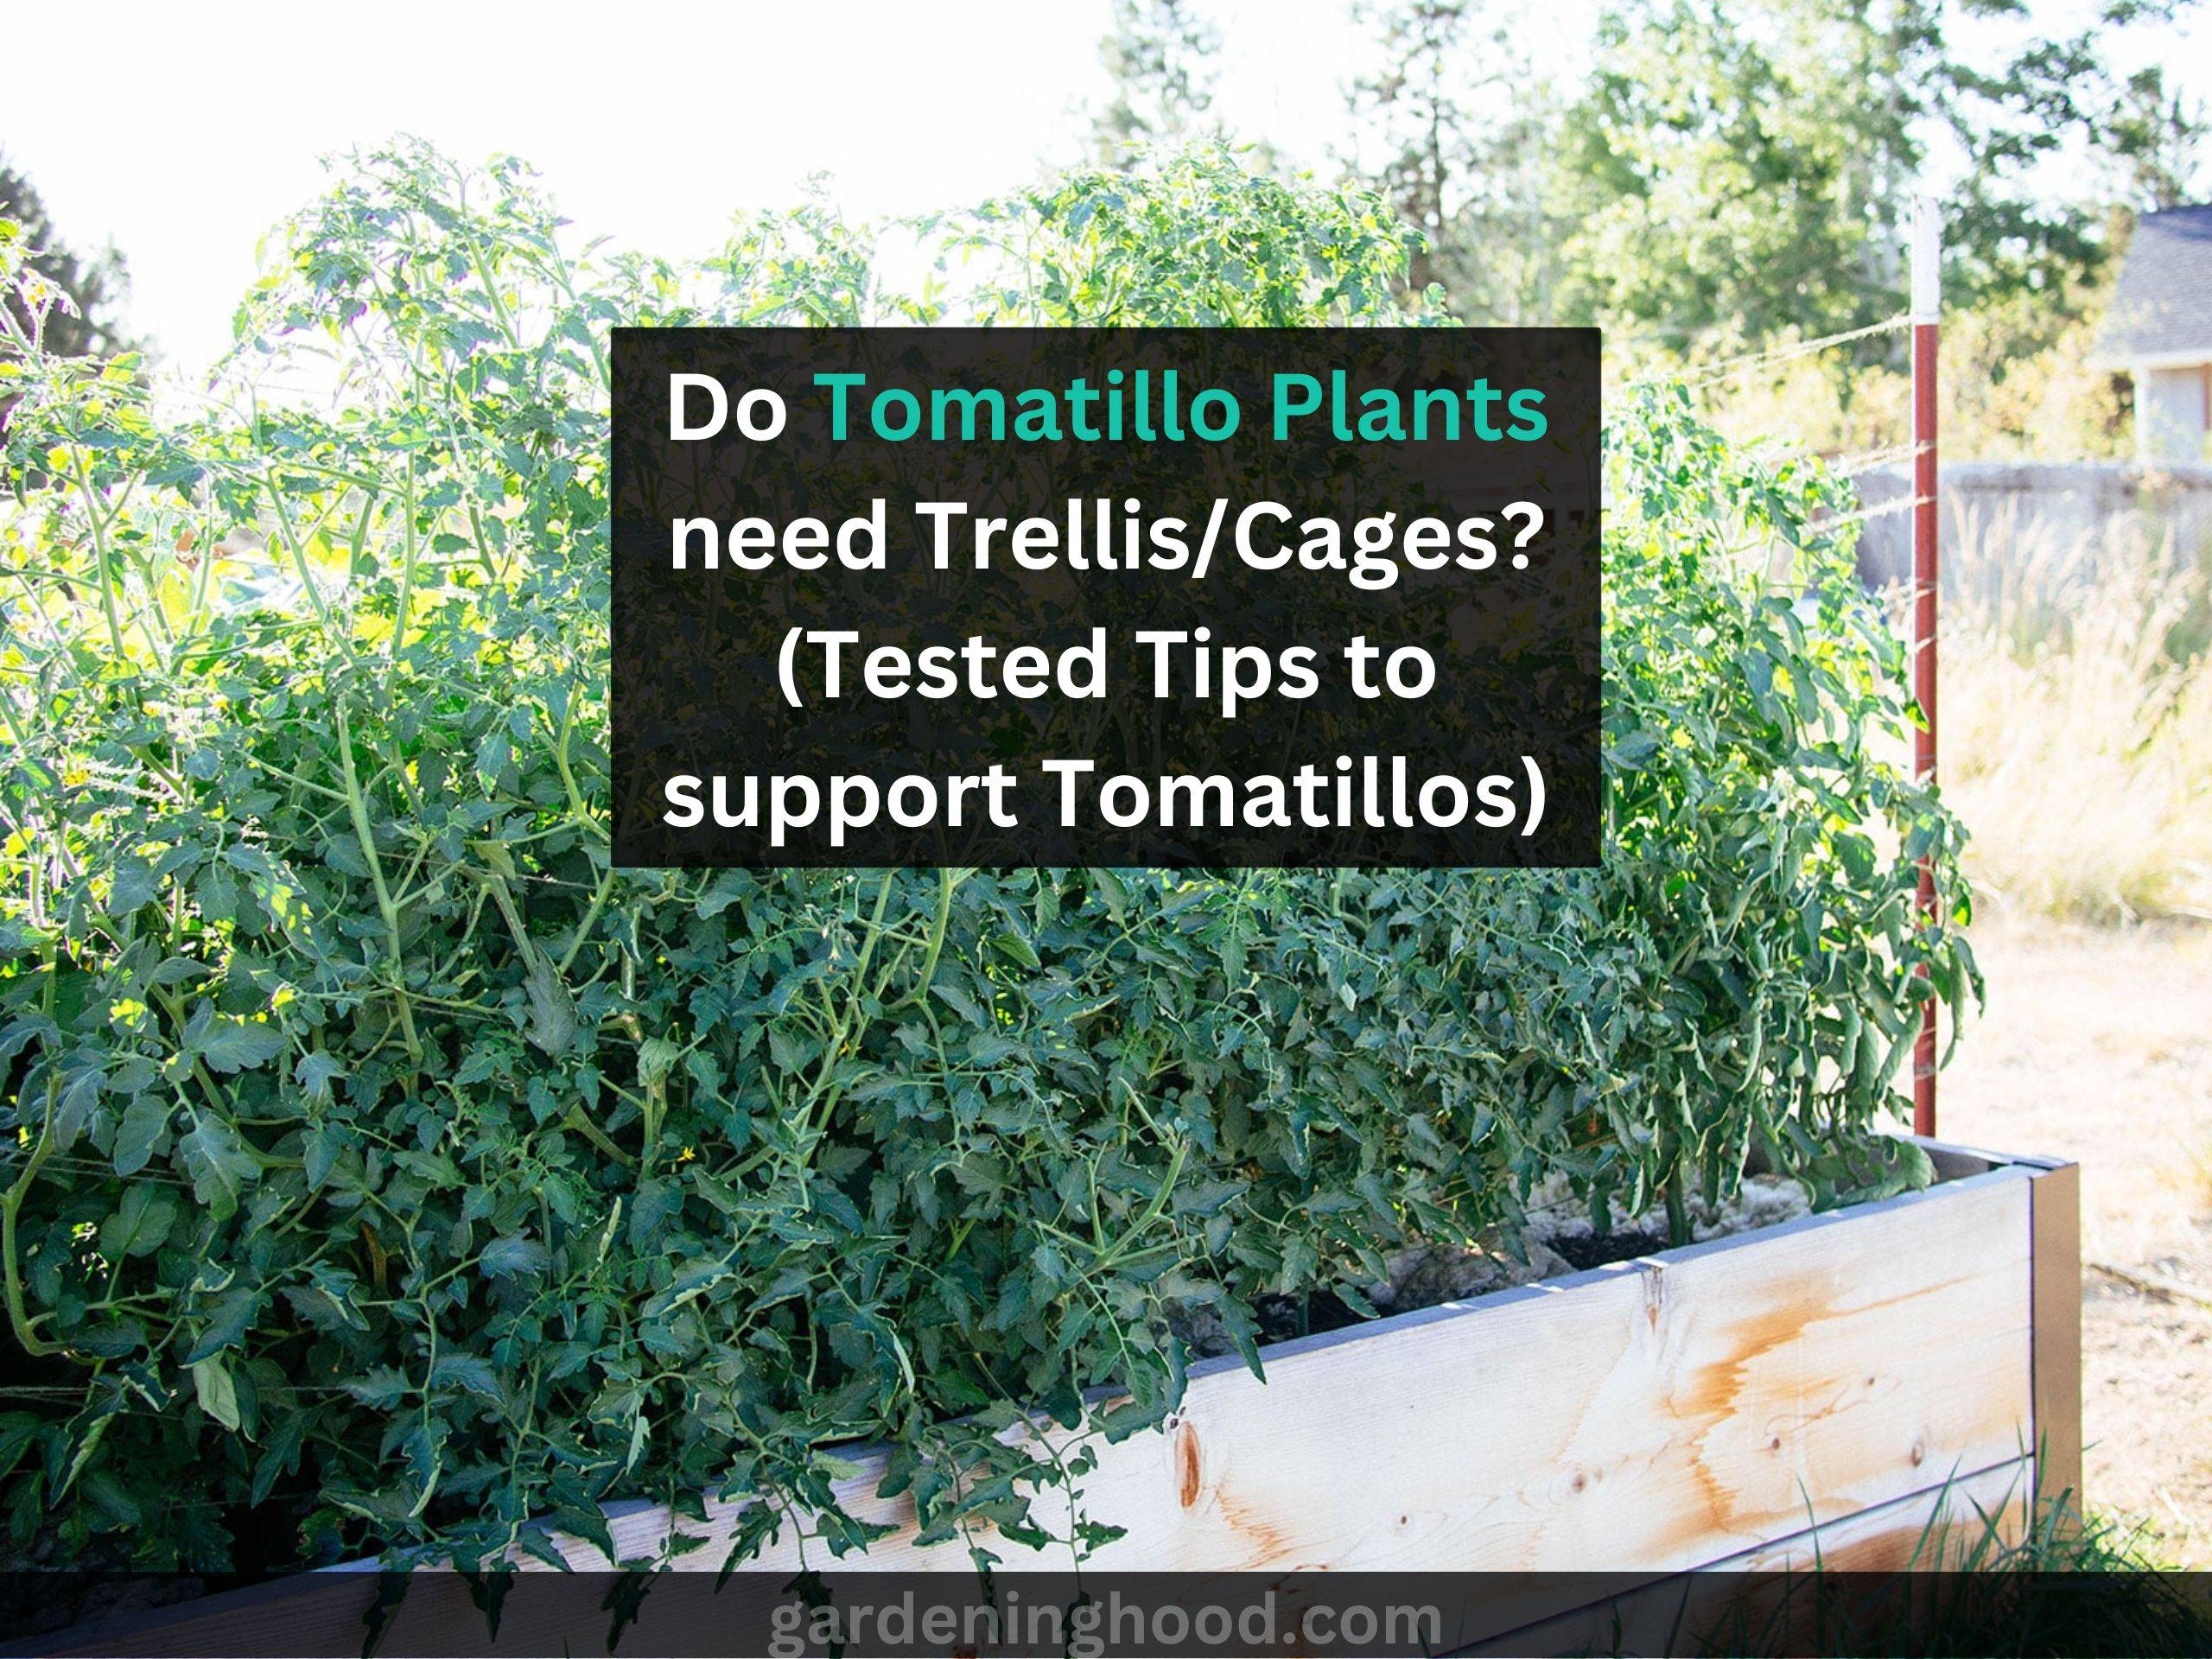 Do Tomatillo Plants need Trellis/Cages? (Tested Tips to support Tomatillos)